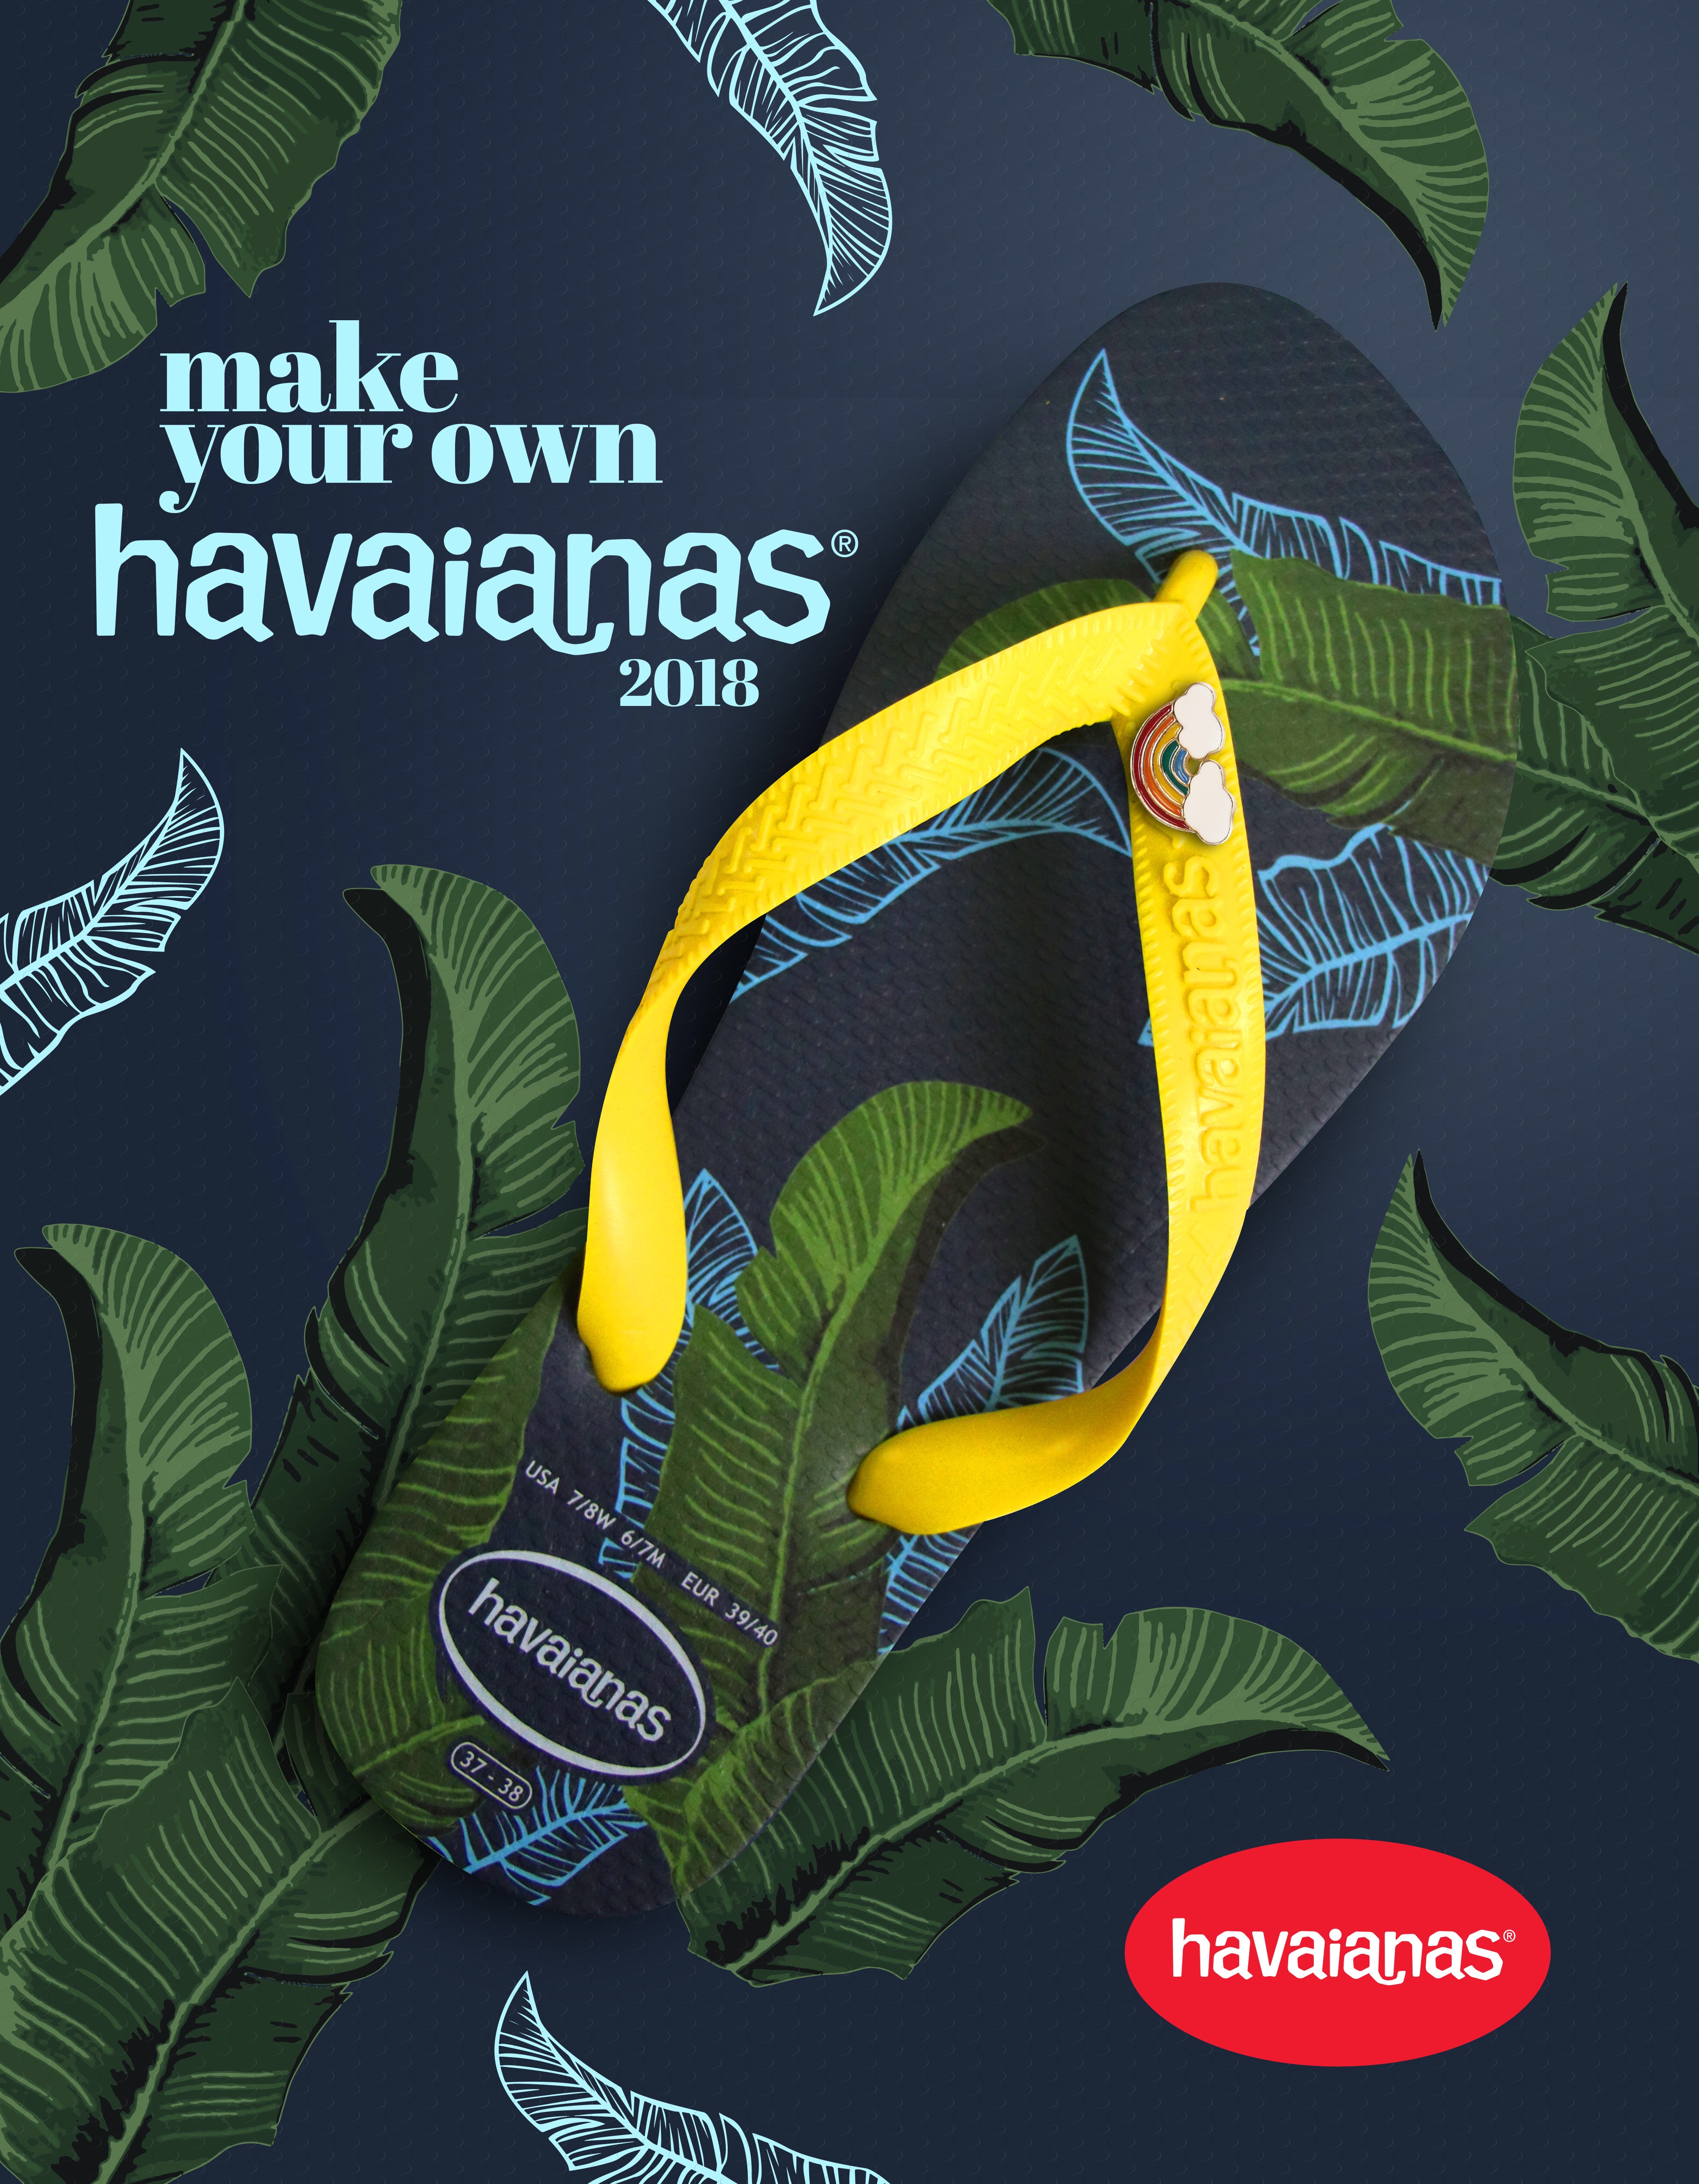 design your own havaianas